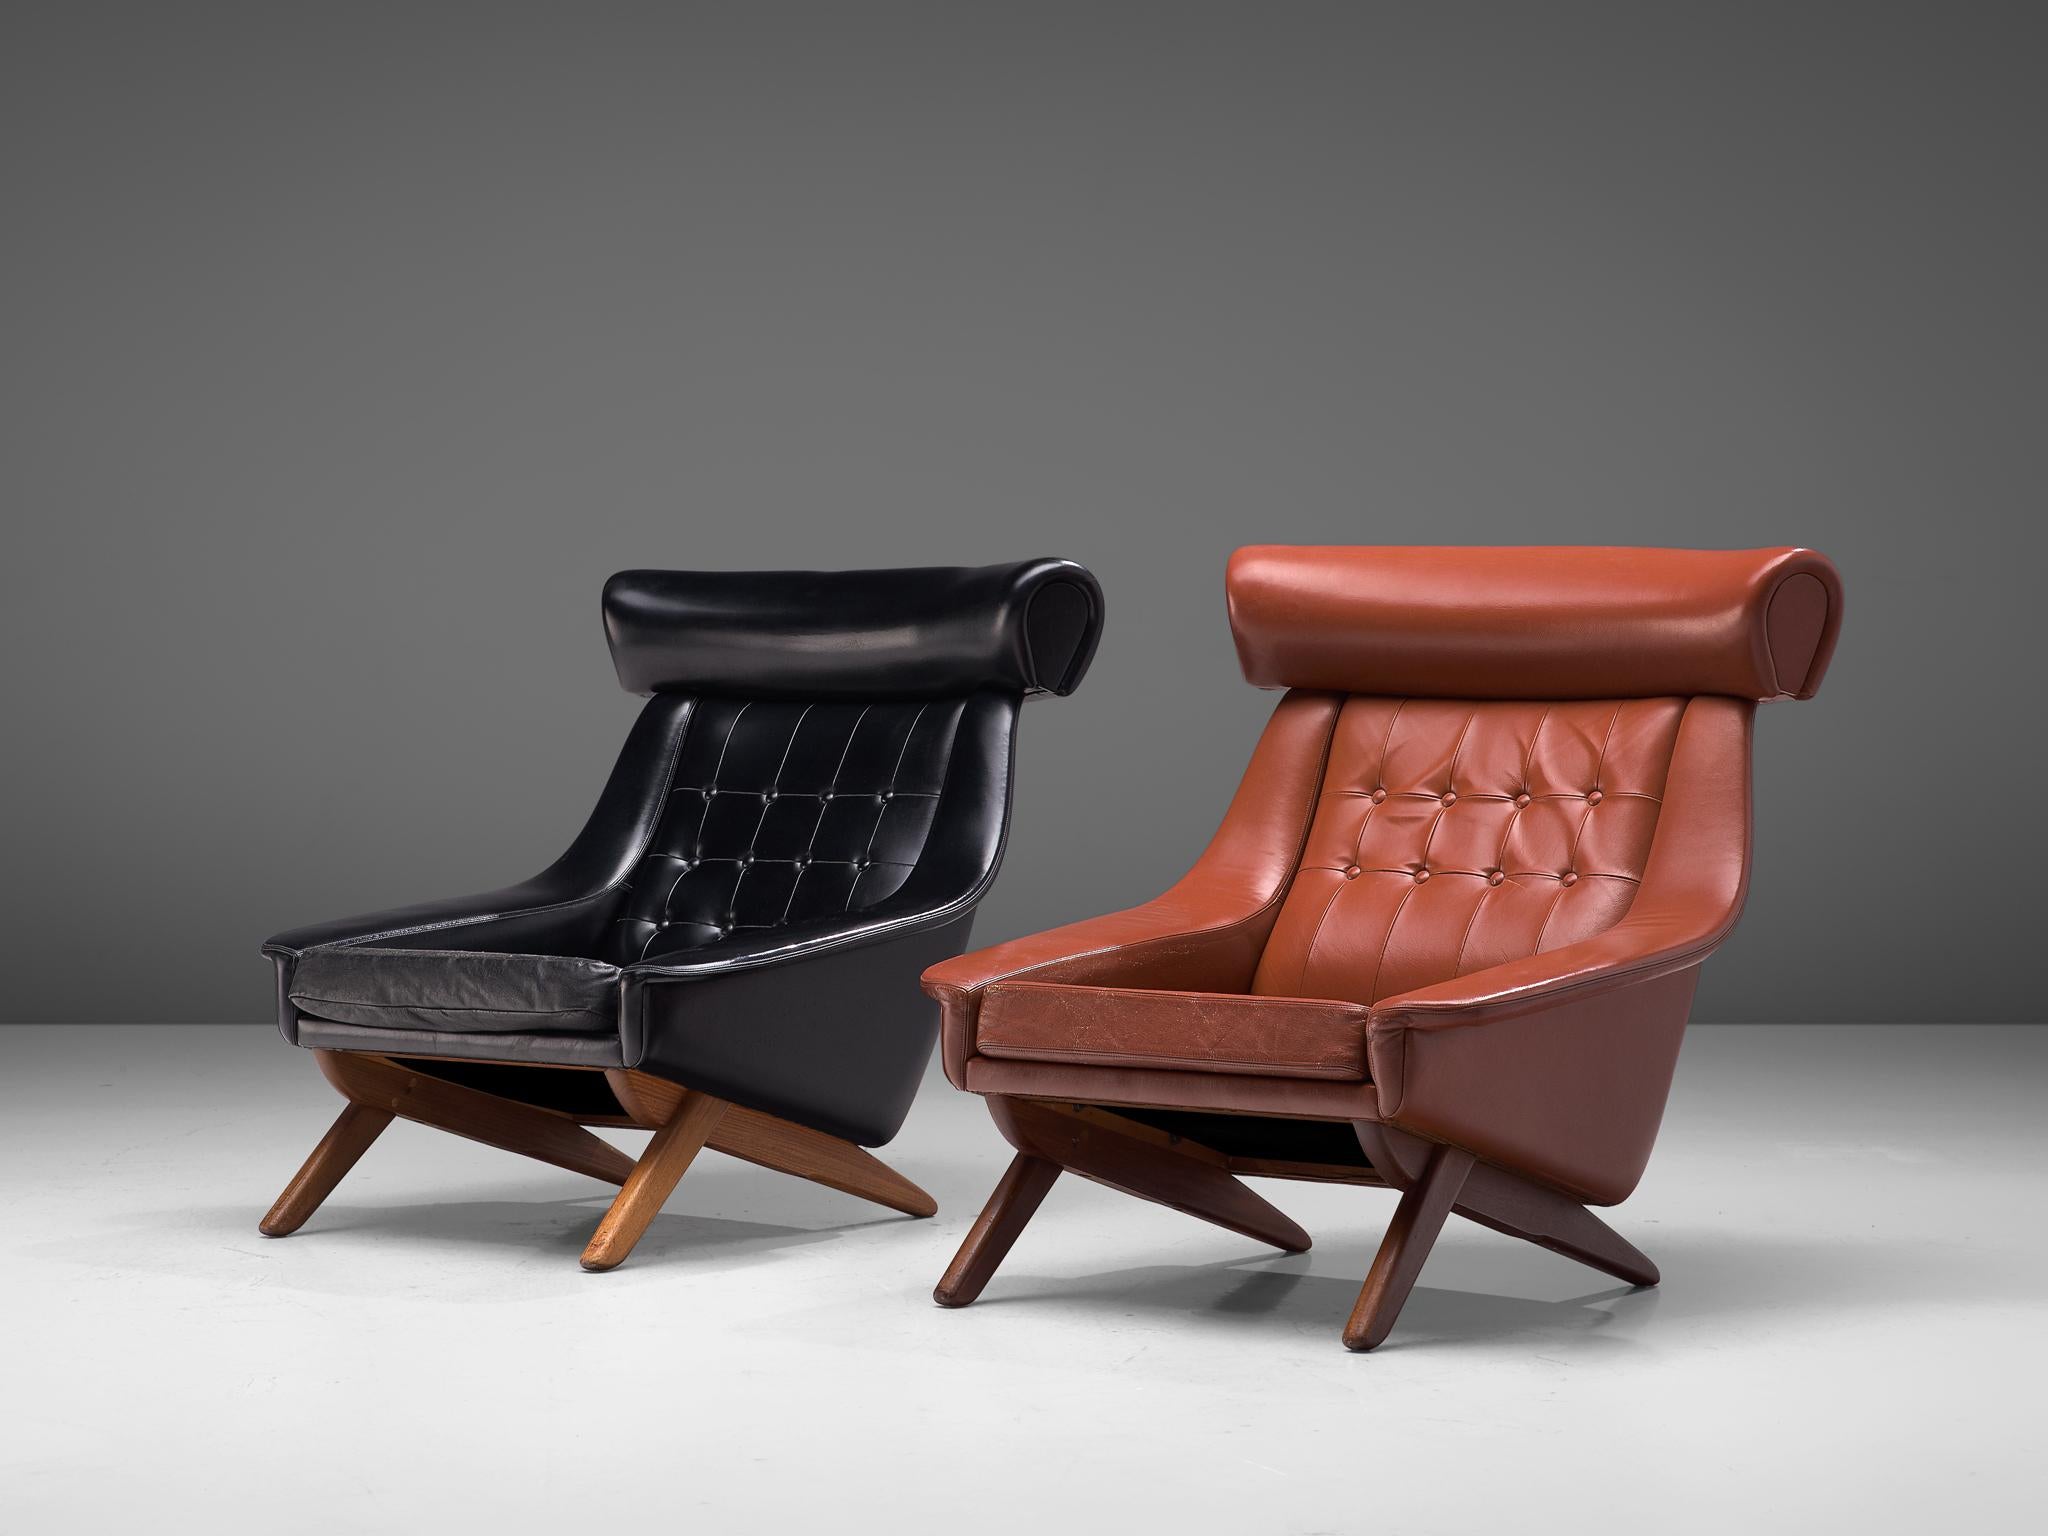 Illum Wikkelsø, lounge chairs model ‘Ox’, leatherette, wood, Denmark, 1960s

Due to the prominent horizontal headrest this lounge chair by Illum Wikkelsø is nicknamed ‘Ox’. In a way, it also visually refers to Hans J. Wegner’s ‘Ox’ chair (1960).